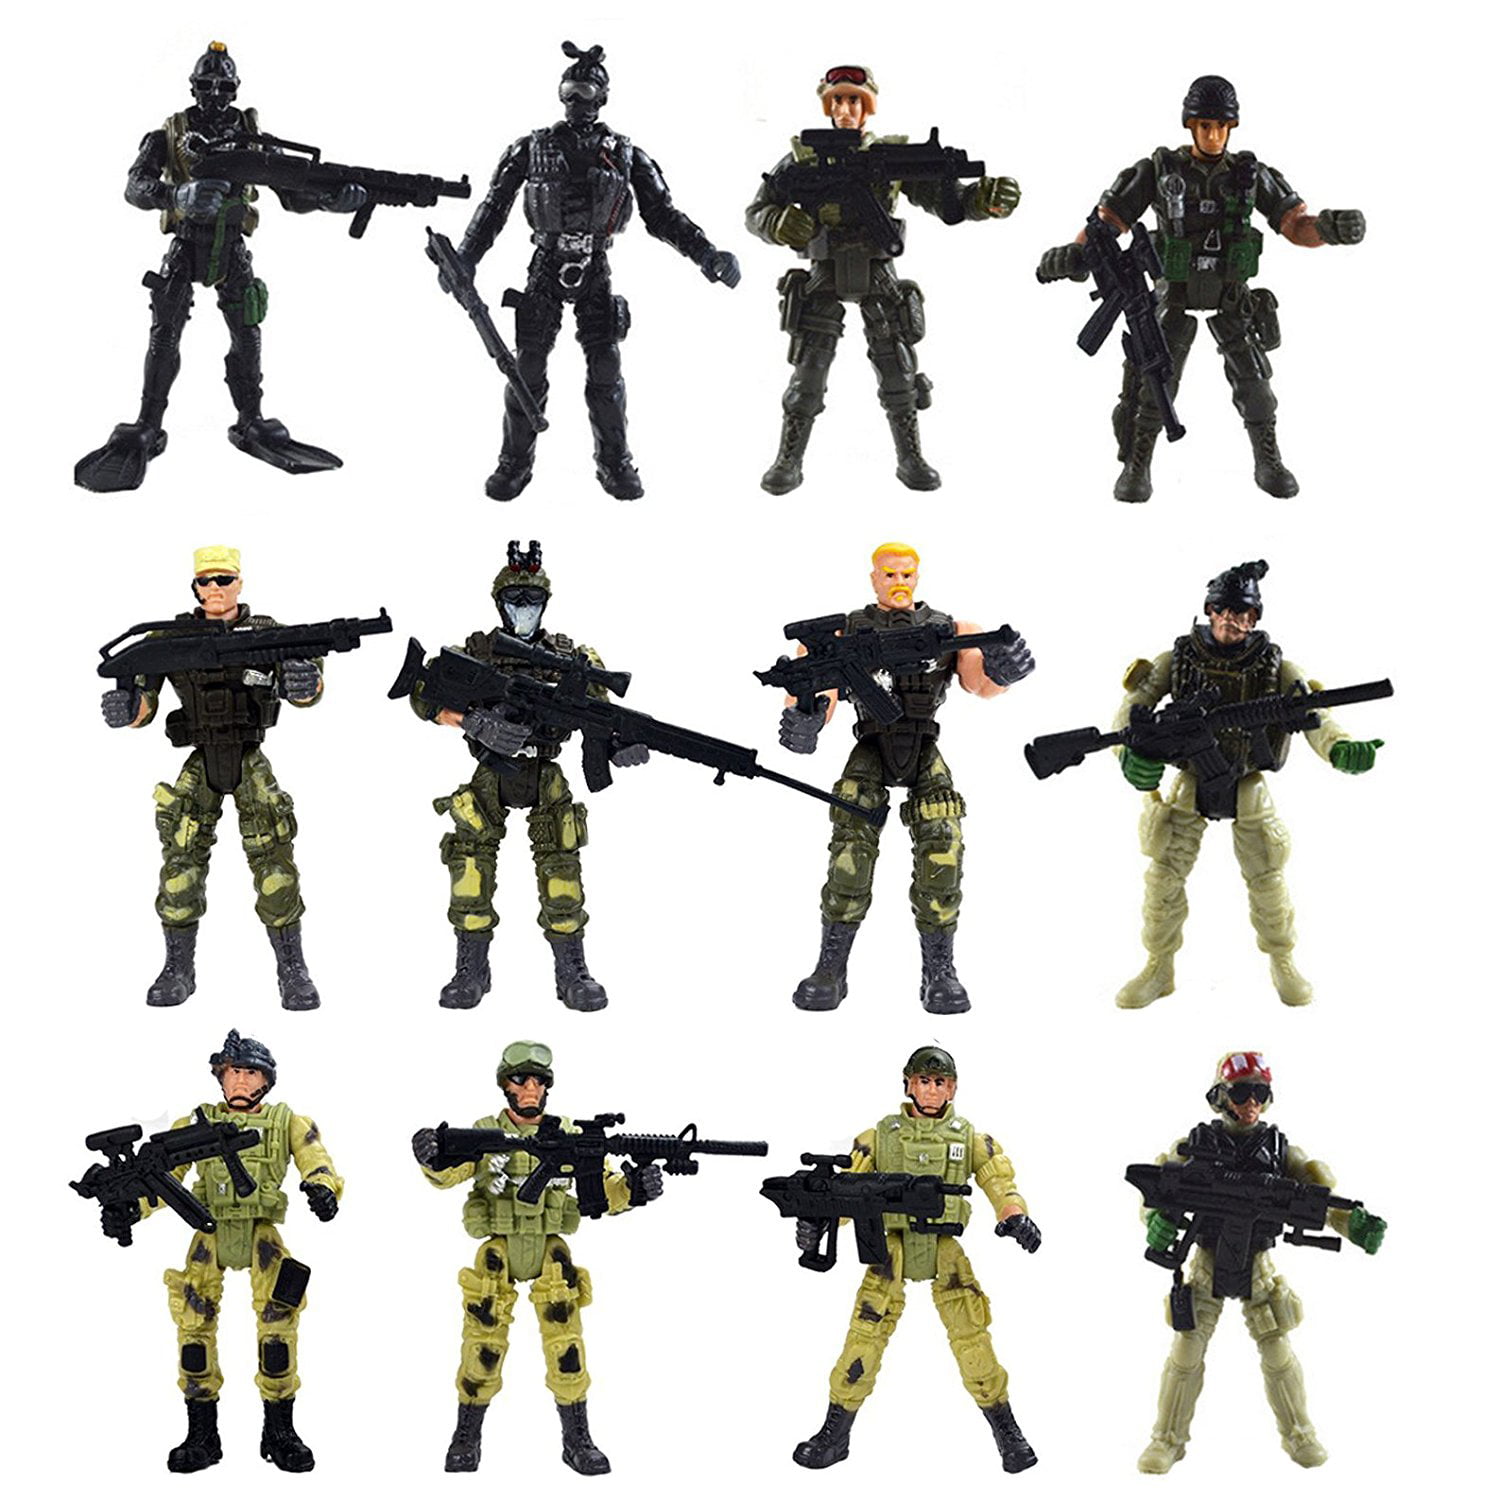 Plastic 9cm Special Force Action Figure Army Soldiers Toy Kit Pack of 10 